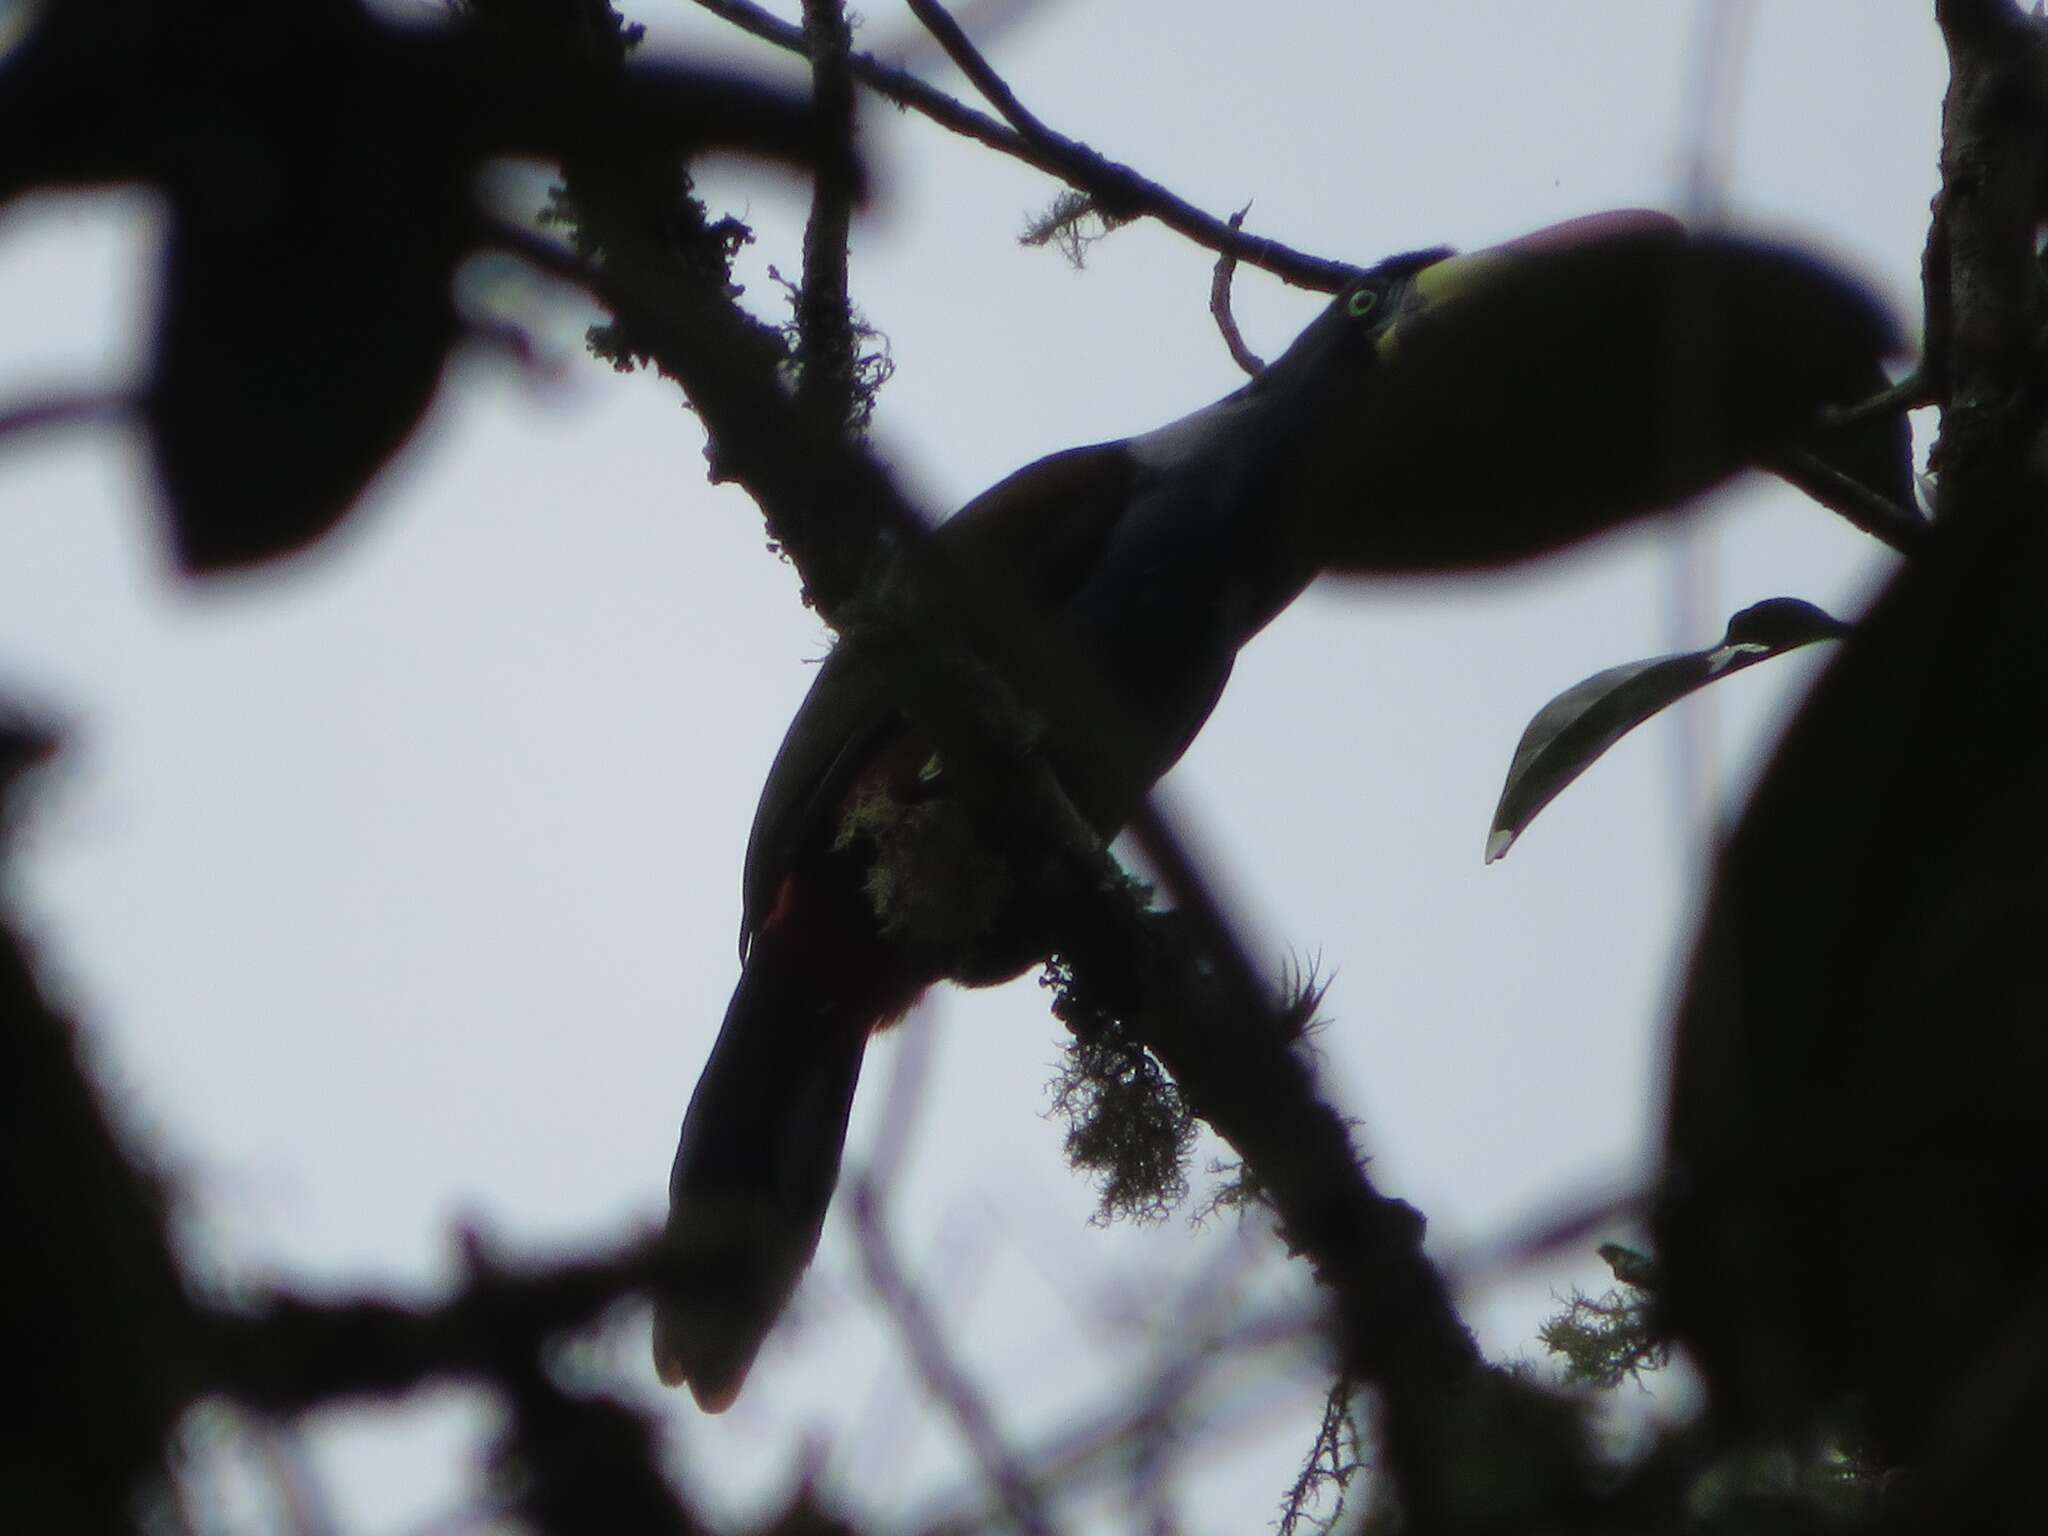 Image of Gray-breasted Mountain-toucan